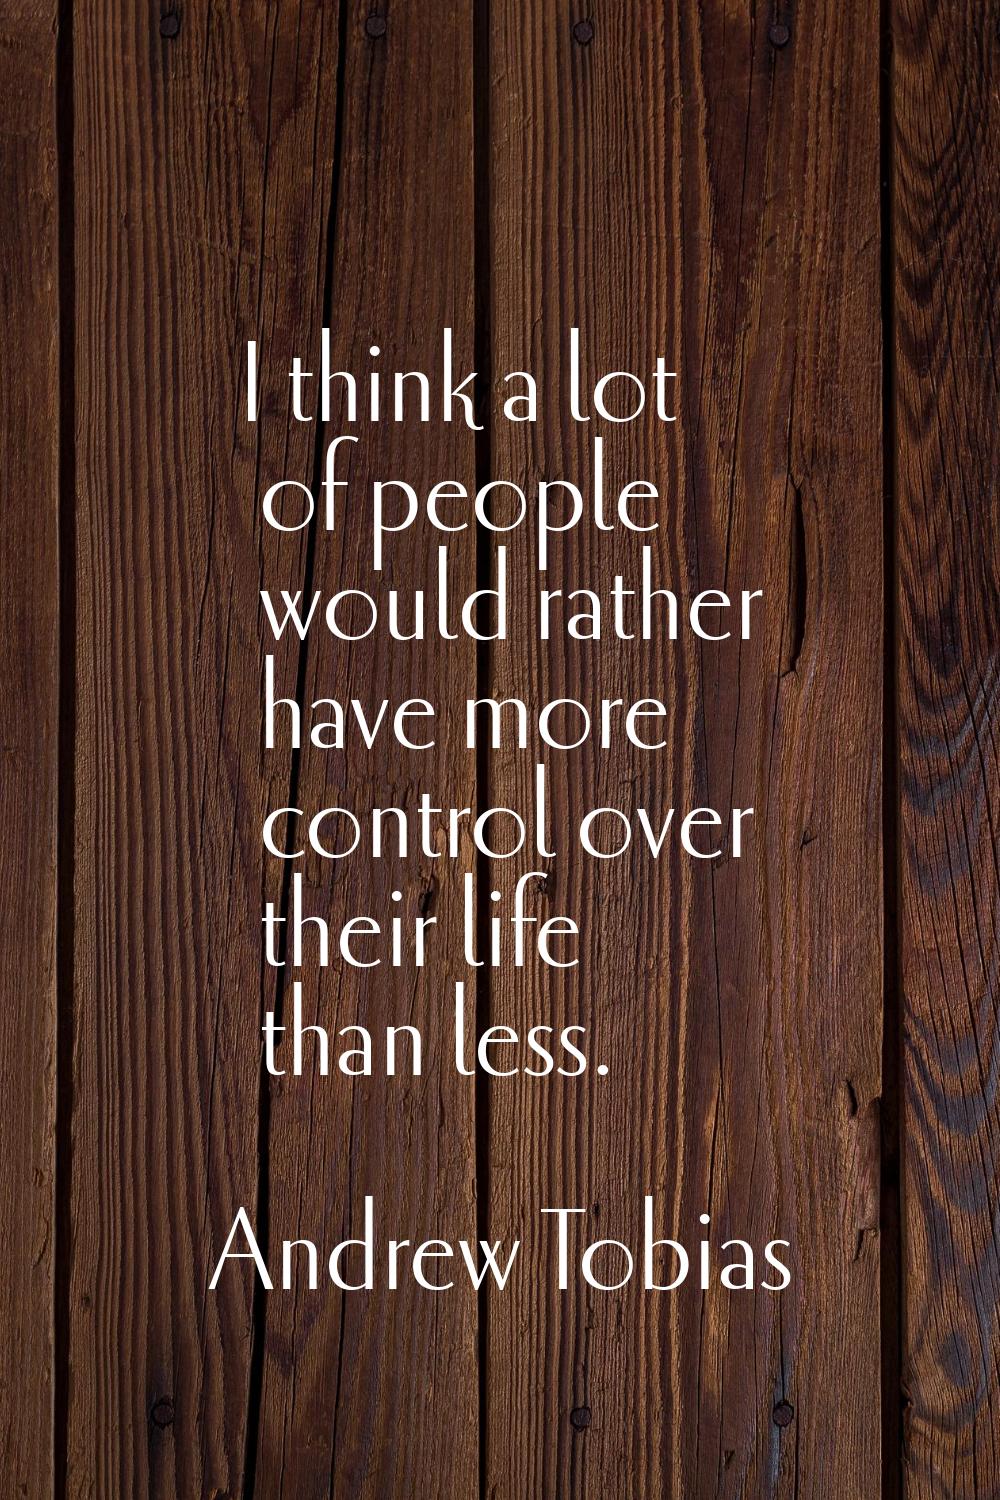 I think a lot of people would rather have more control over their life than less.